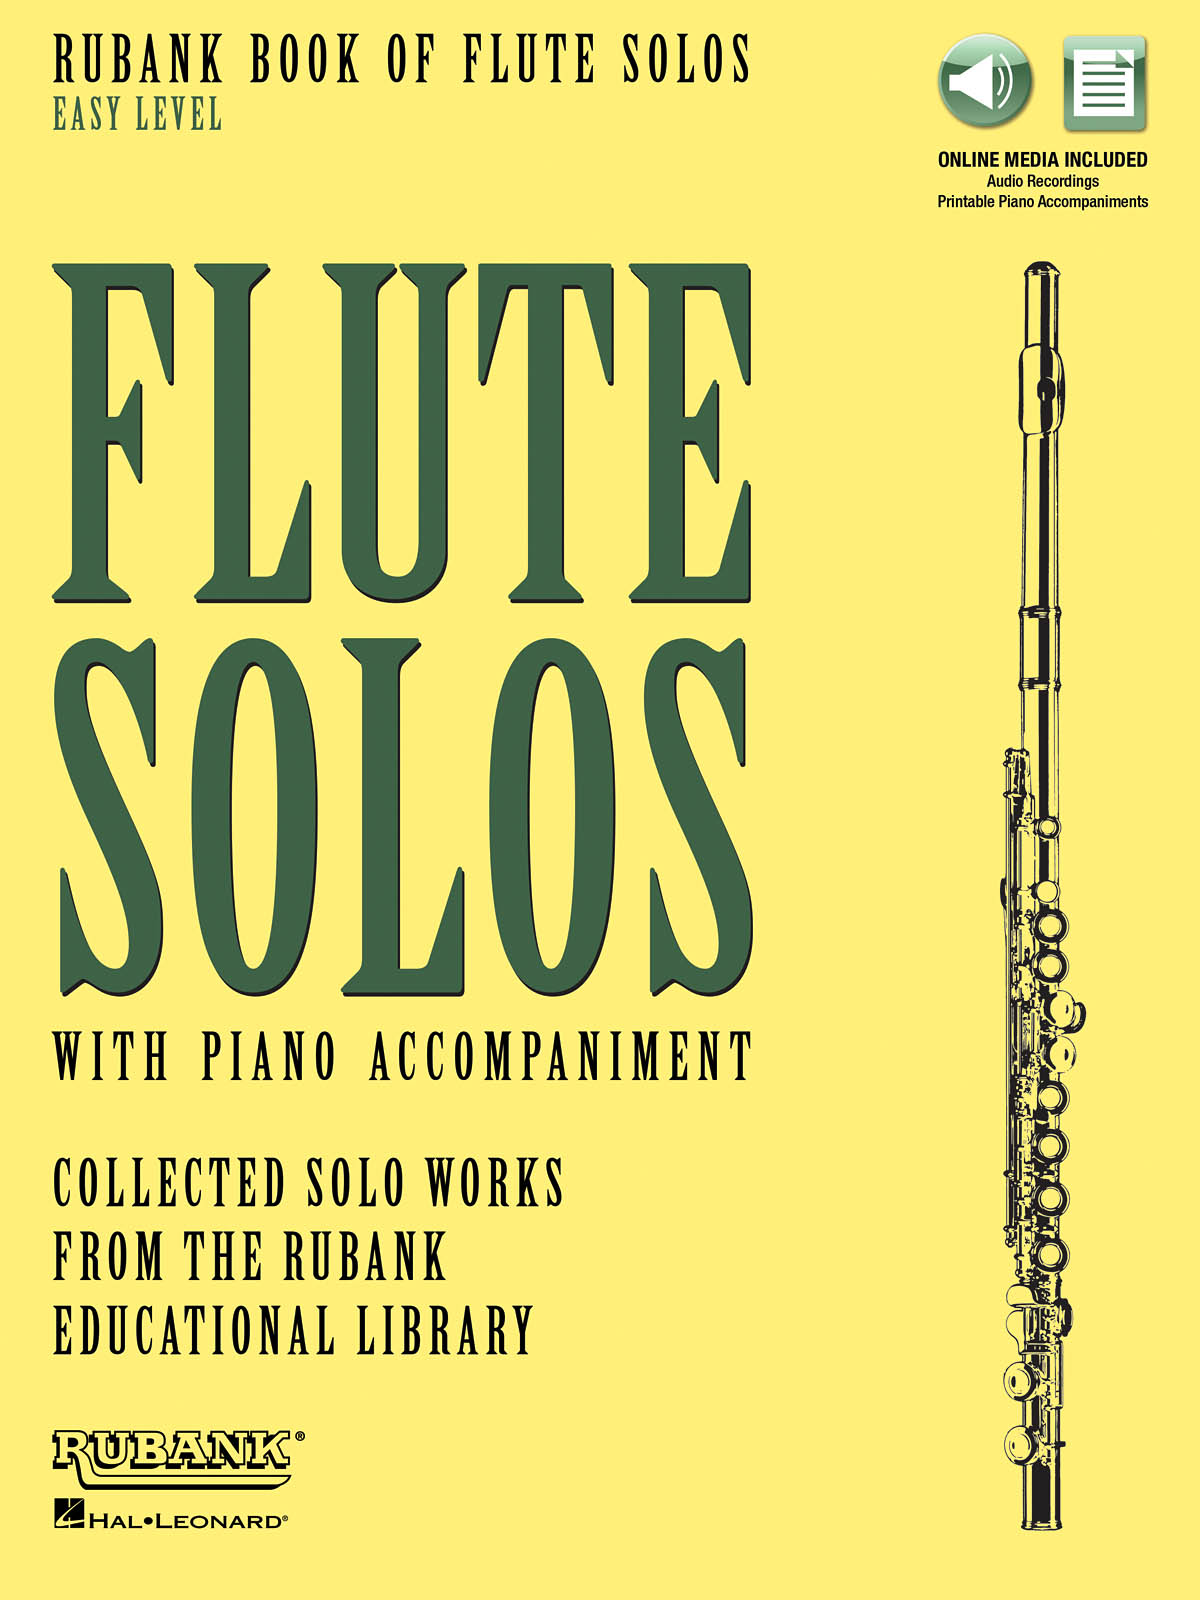 Rubank Book of Flute Solos - Easy Level - with Piano Accompaniment